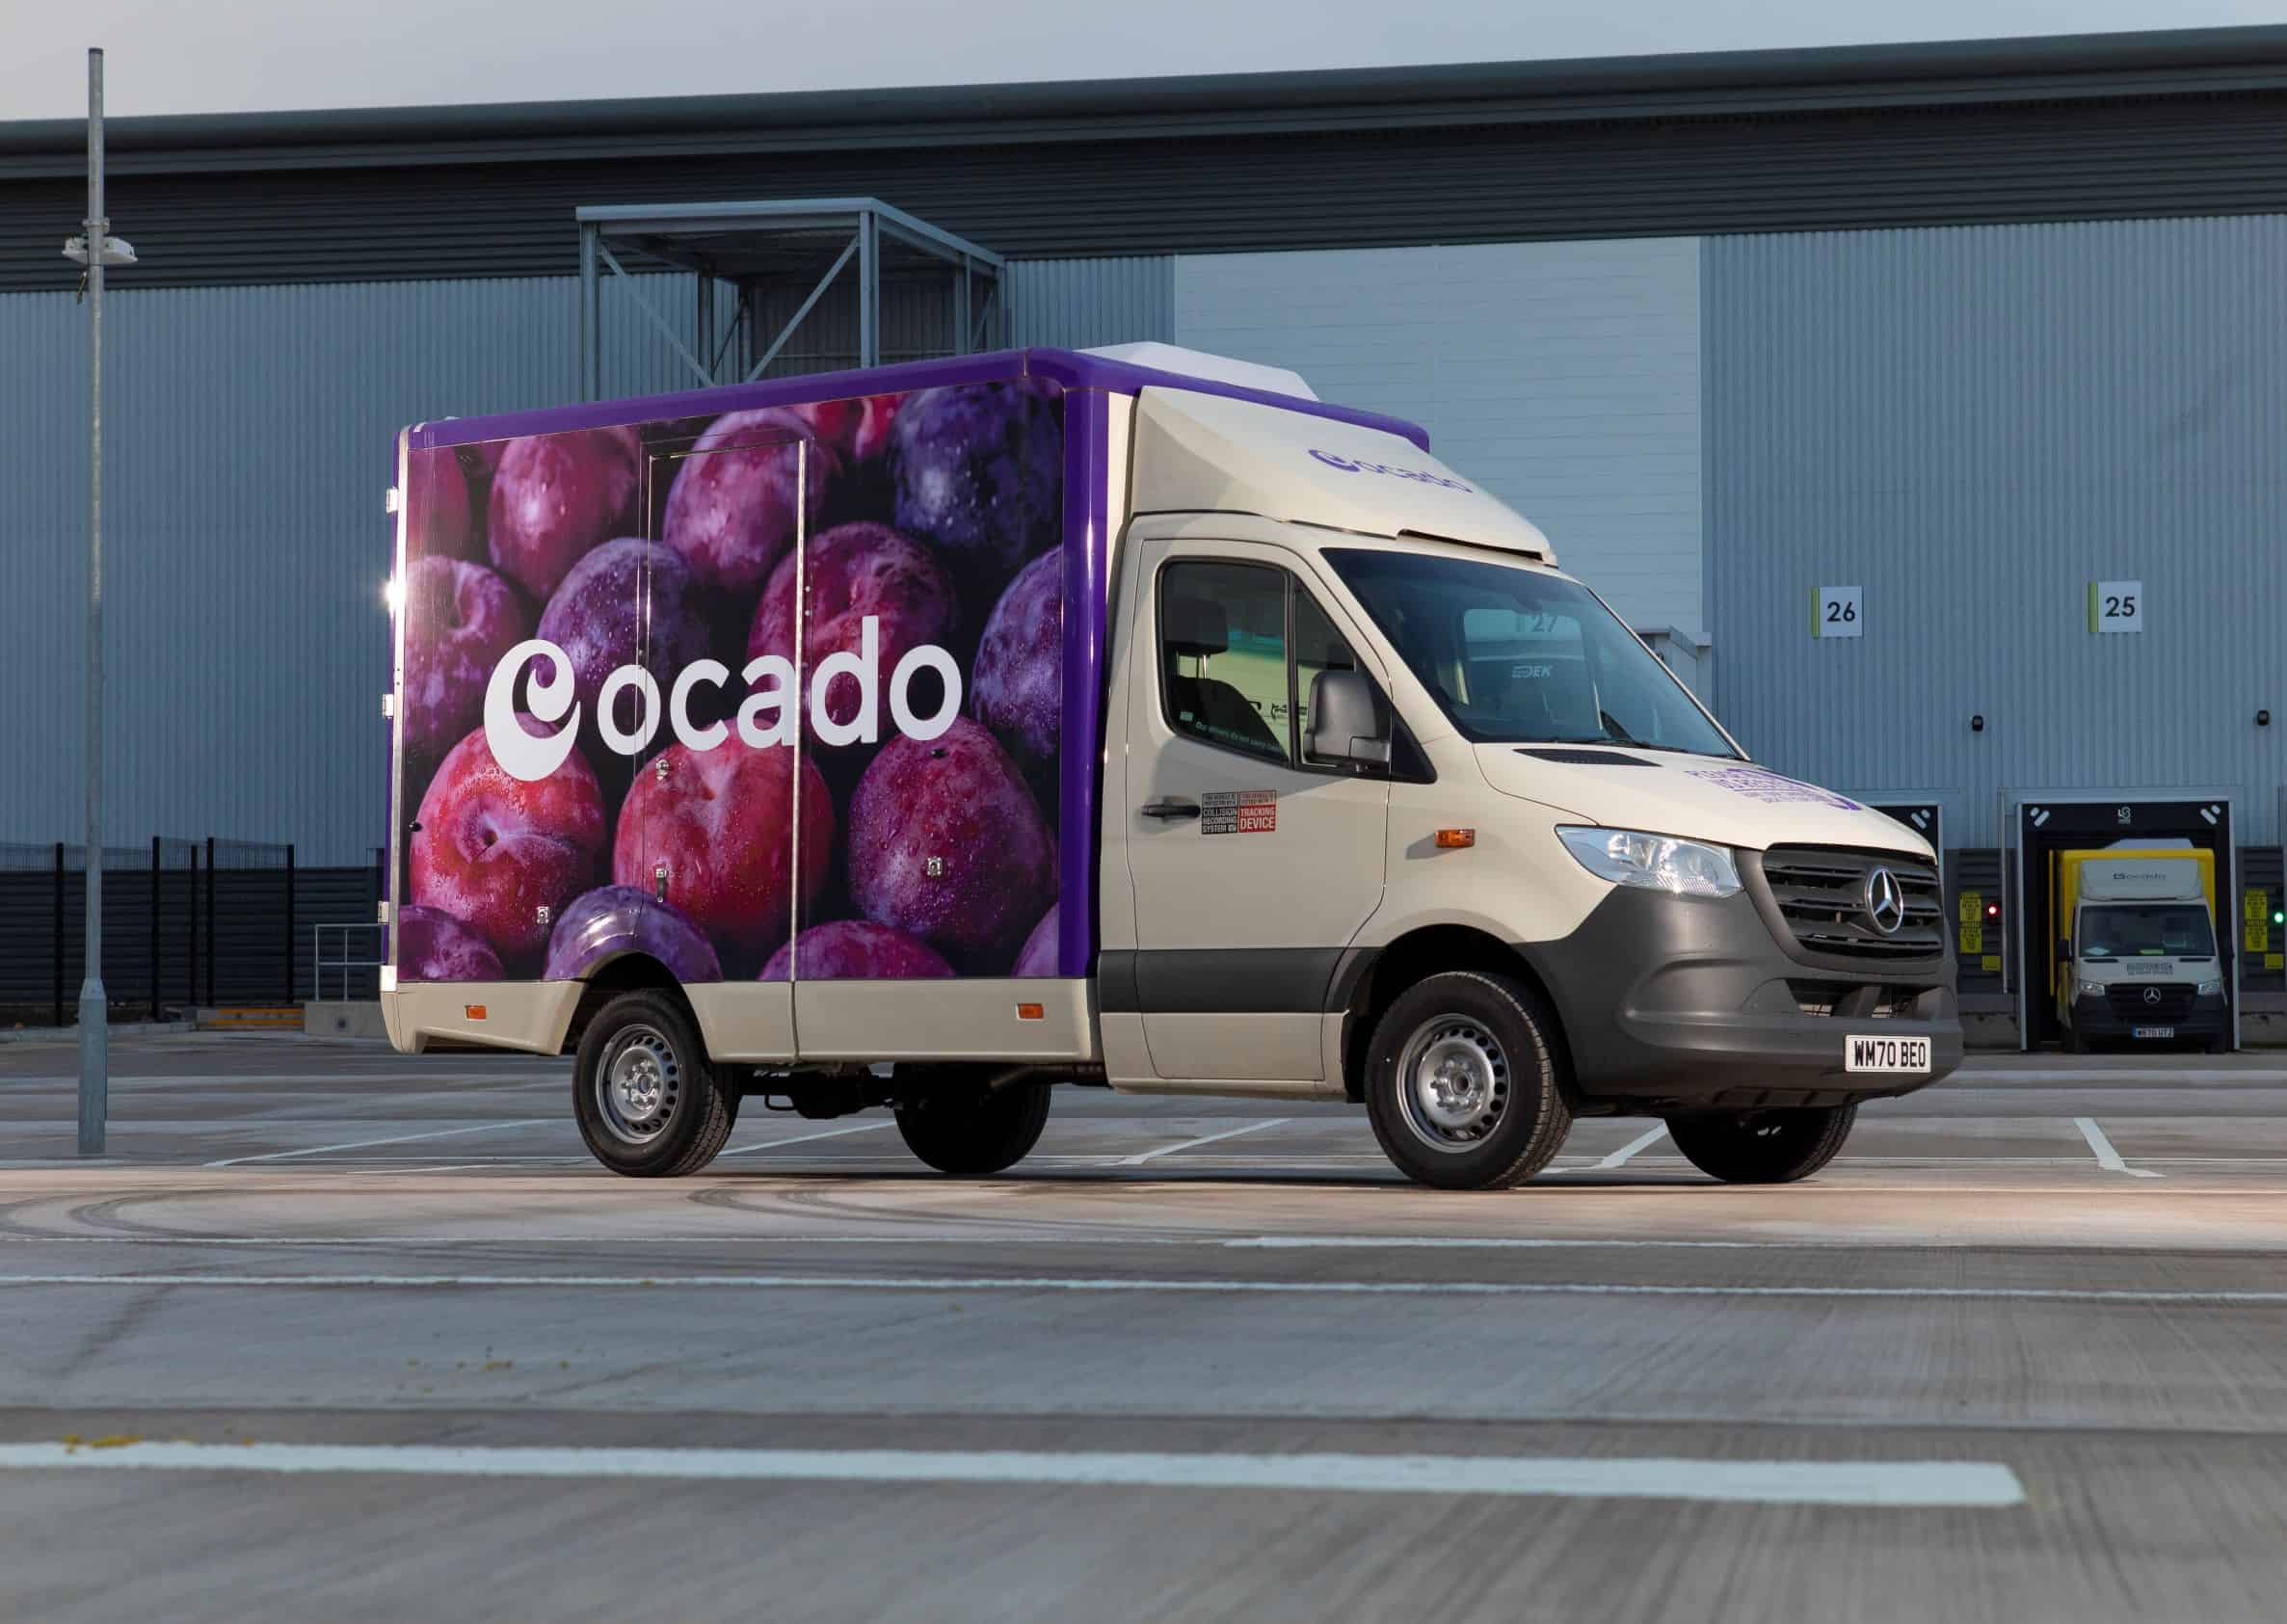 Fury as Ocado delivery drivers pay is reported and it’s not much